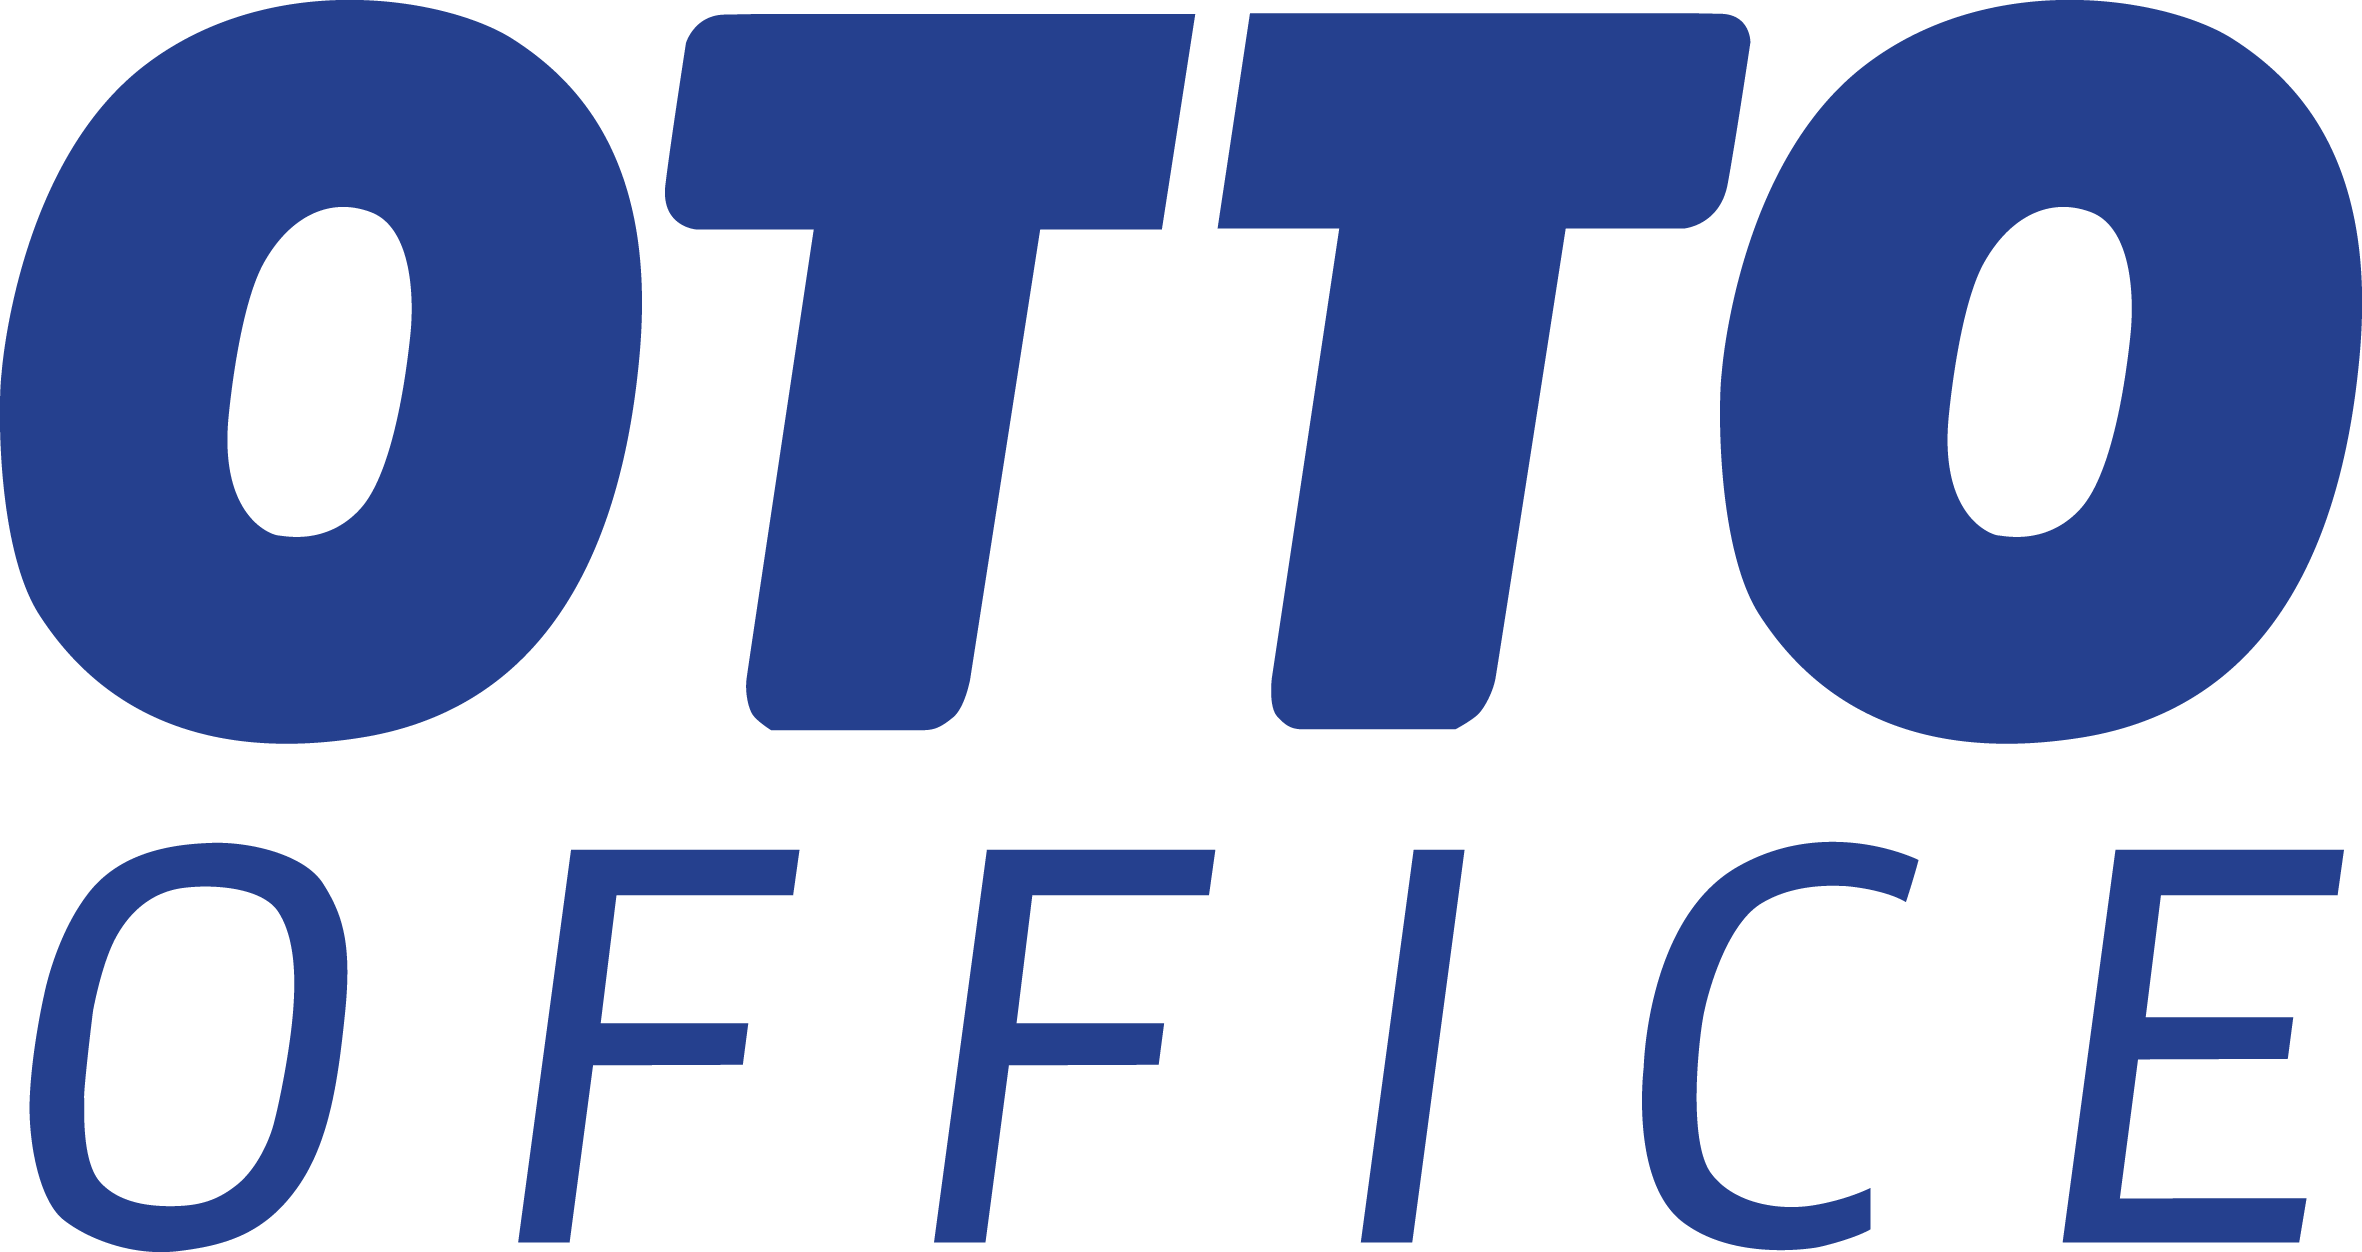 OTTO Office GmbH & Co KG